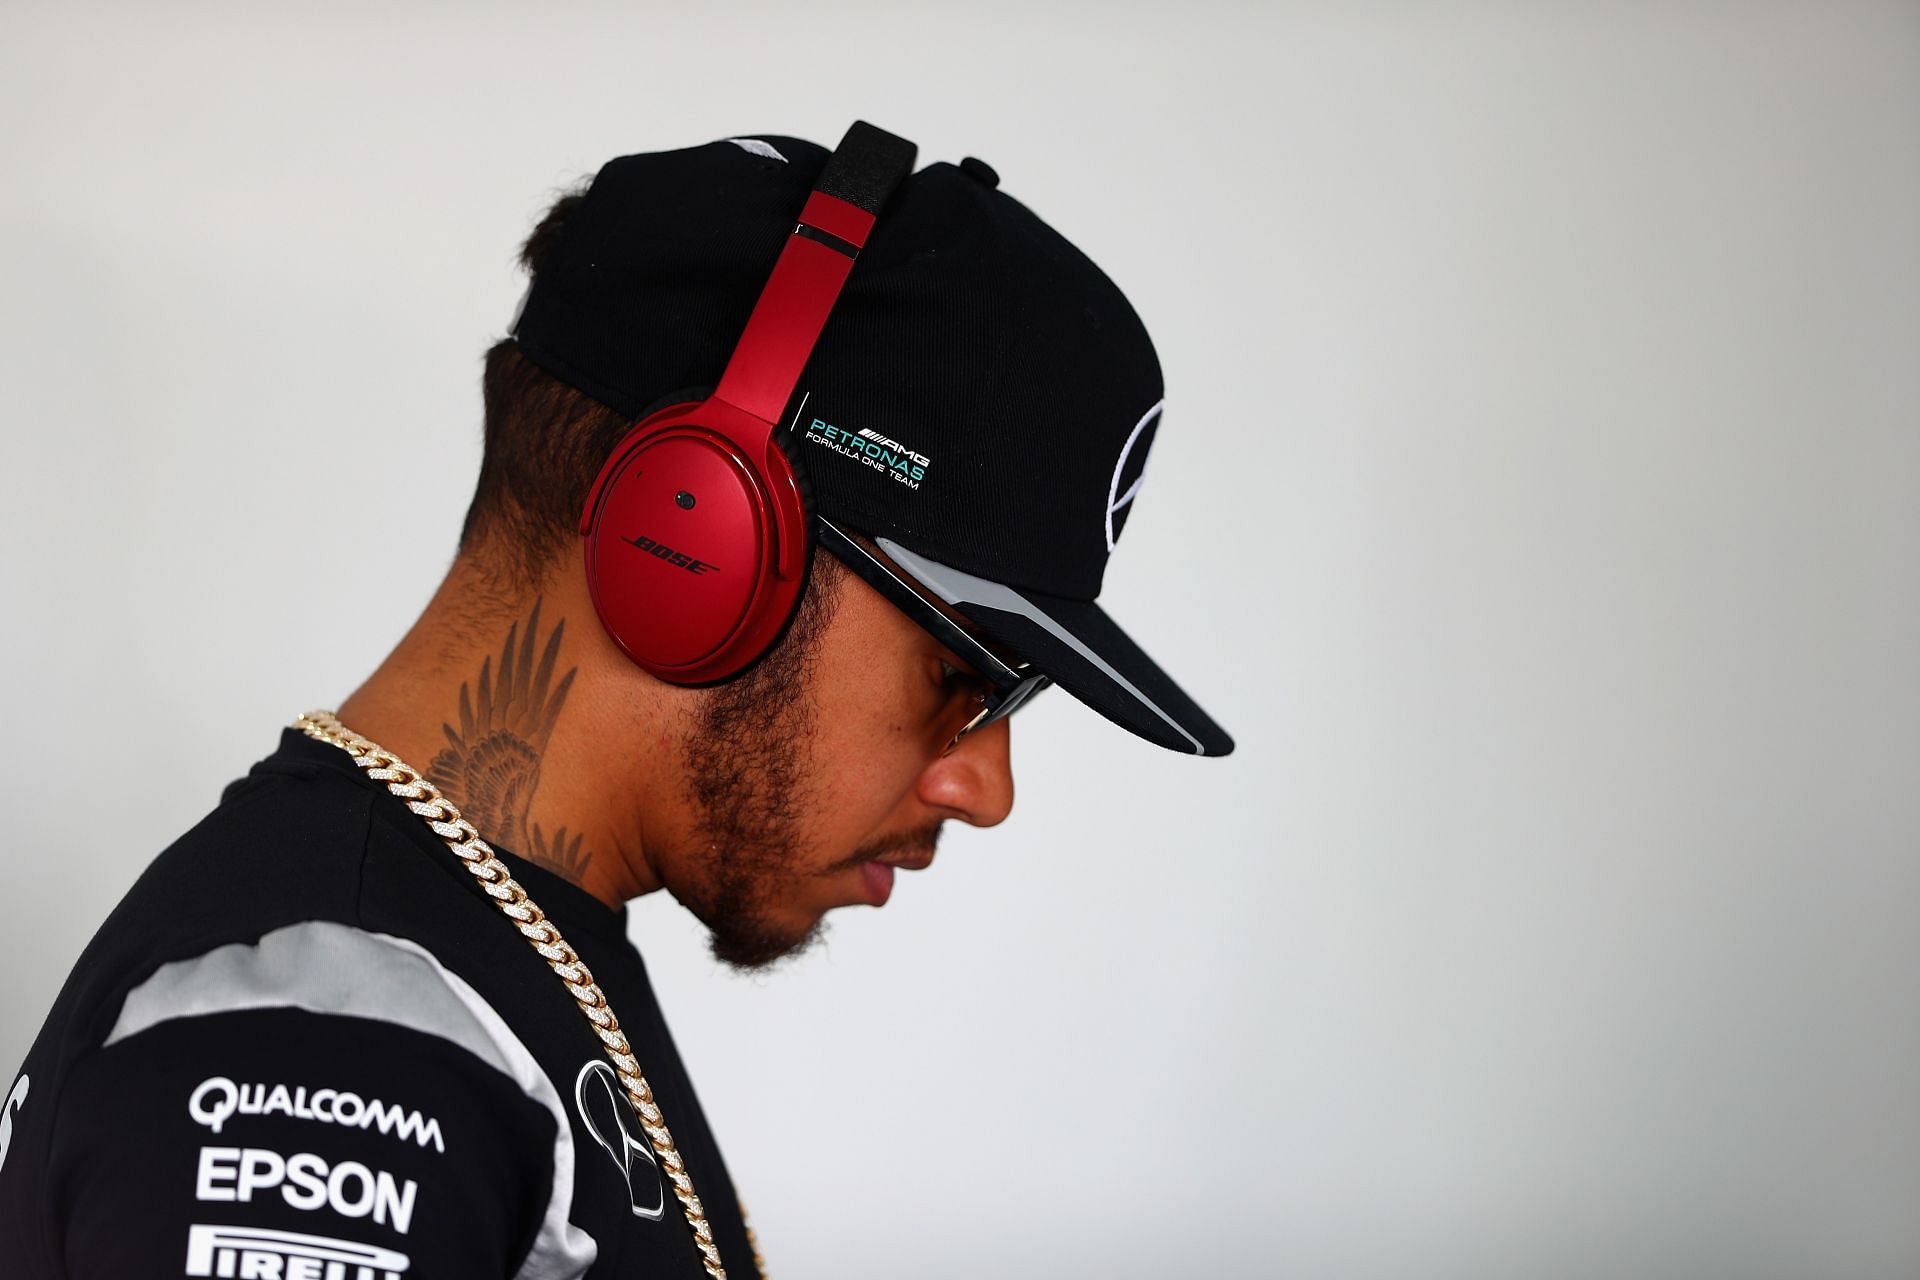 F1 Grand Prix of Bahrain - Lewis Hamilton has a life-long passion for music